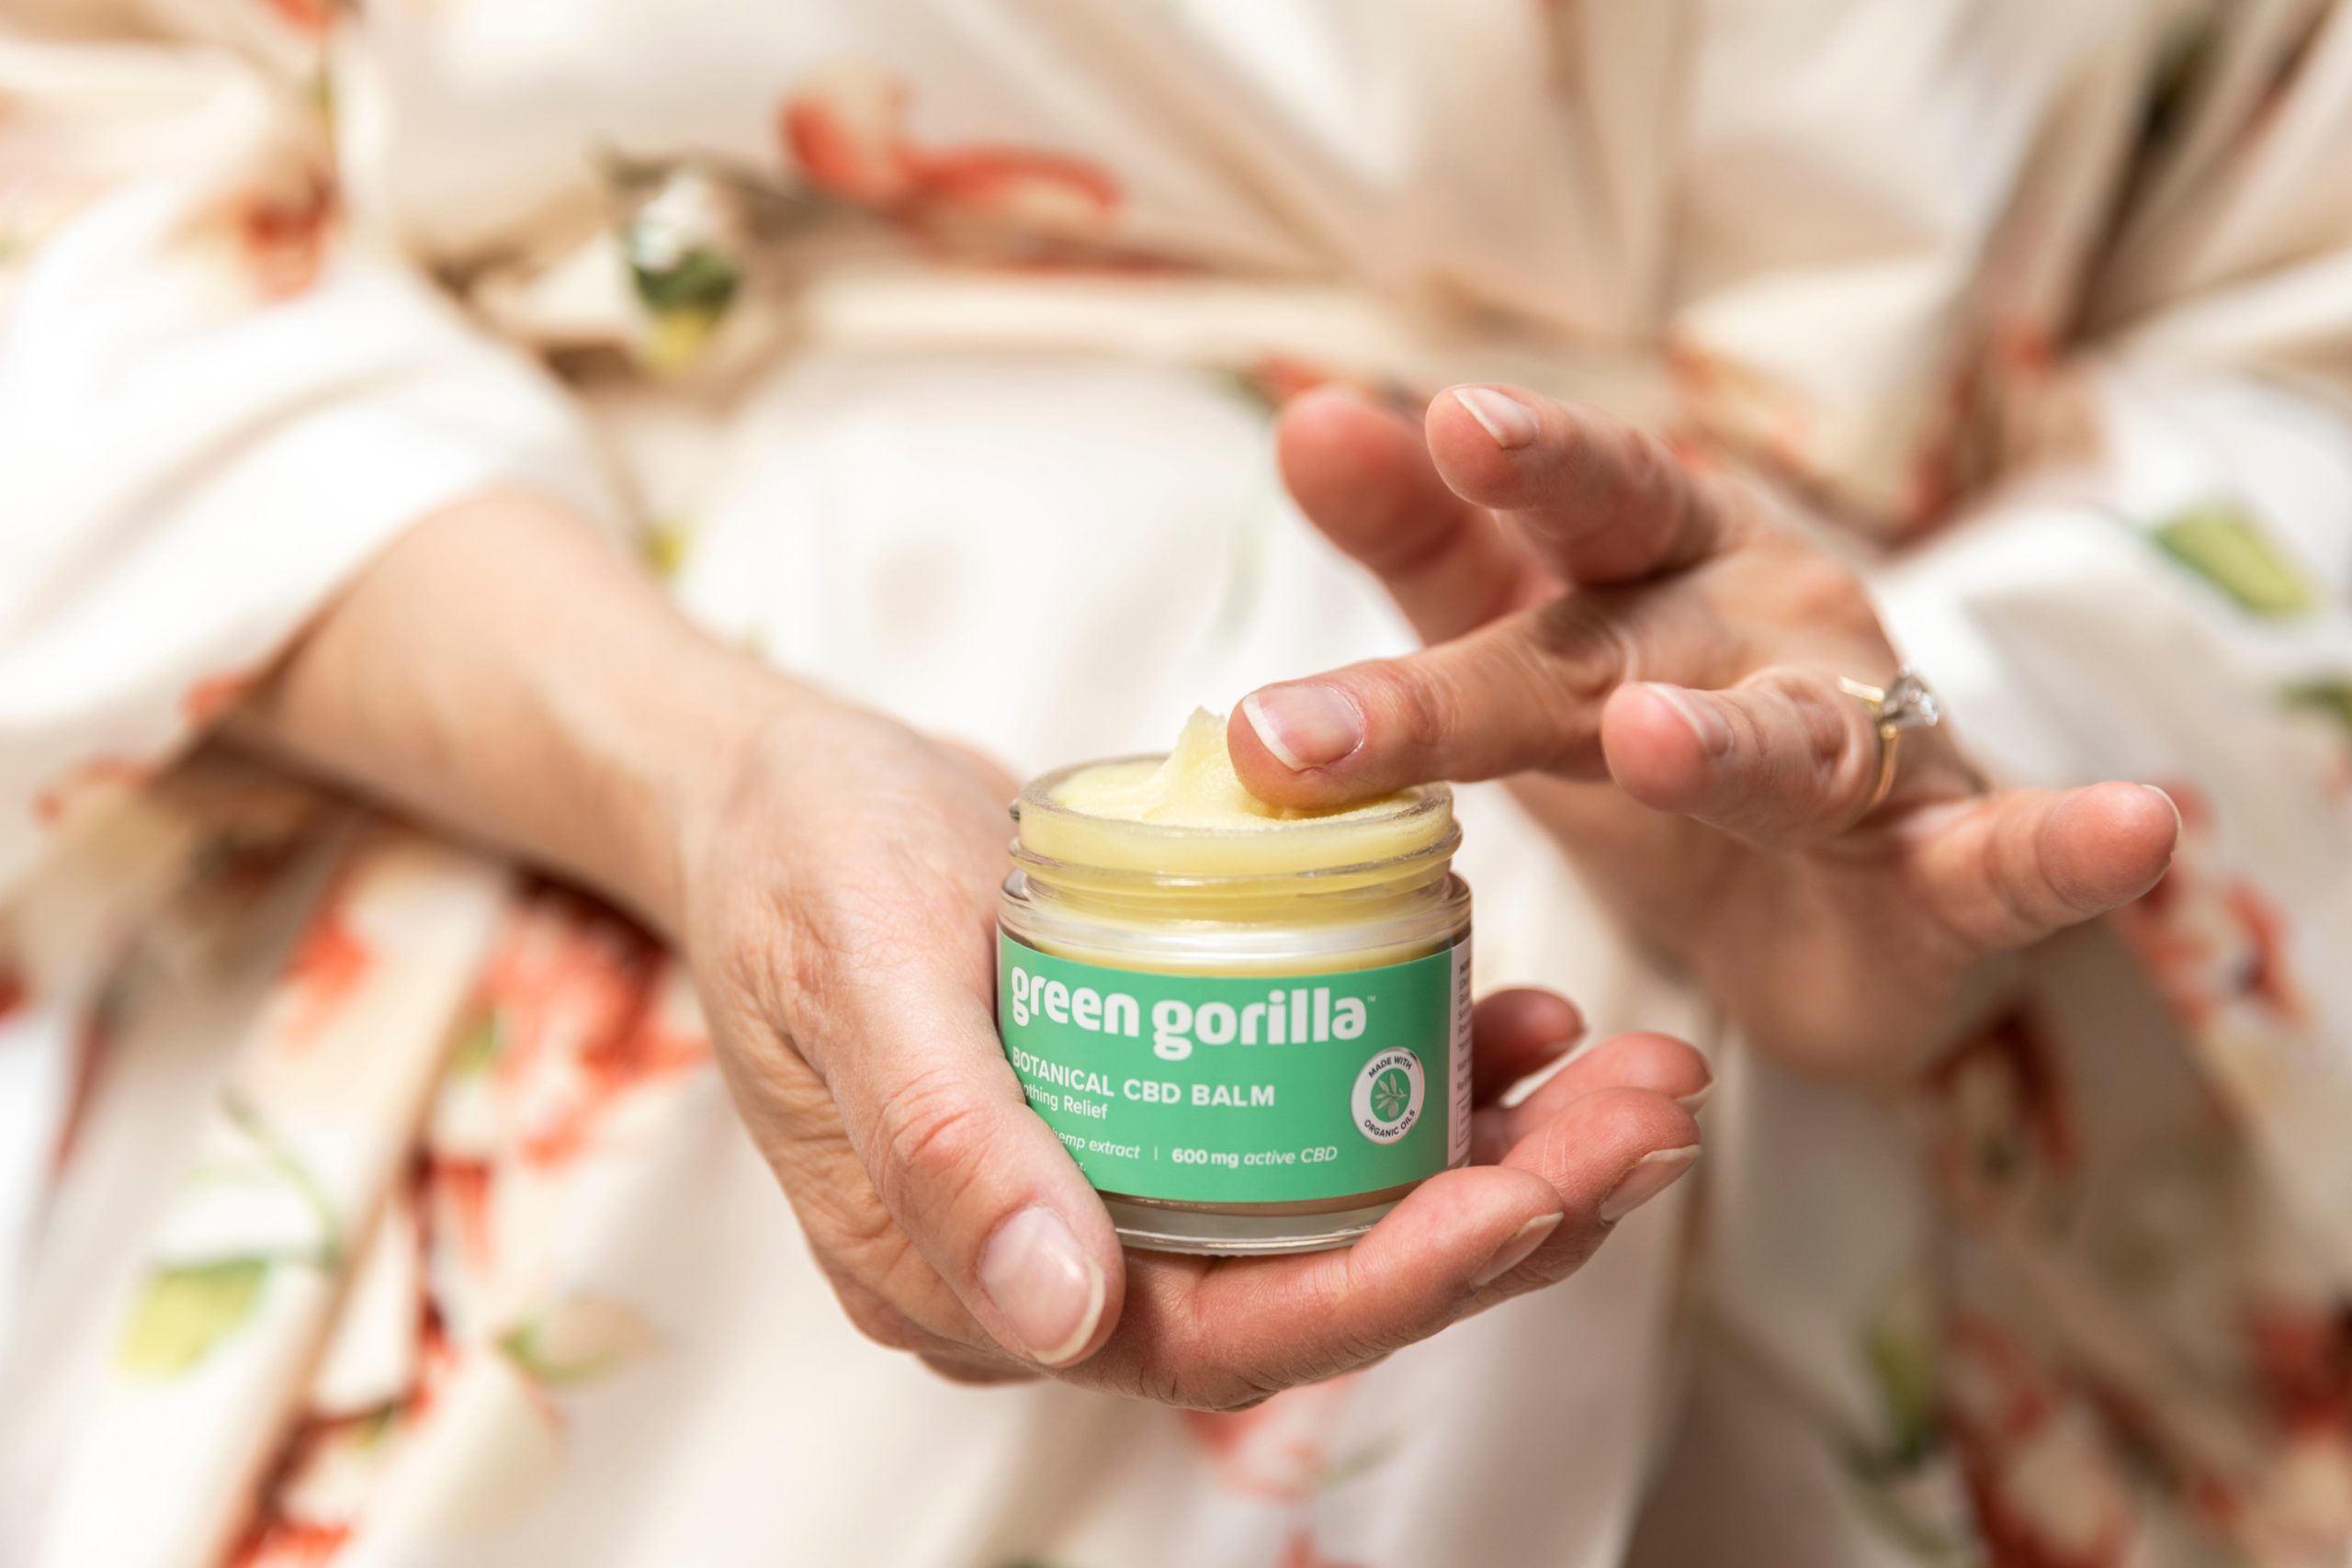 Discovered, Tried, and Desperately Want: Swagger’s September Feature Highlights Green Gorilla™ Organic Botanical CBD Balm